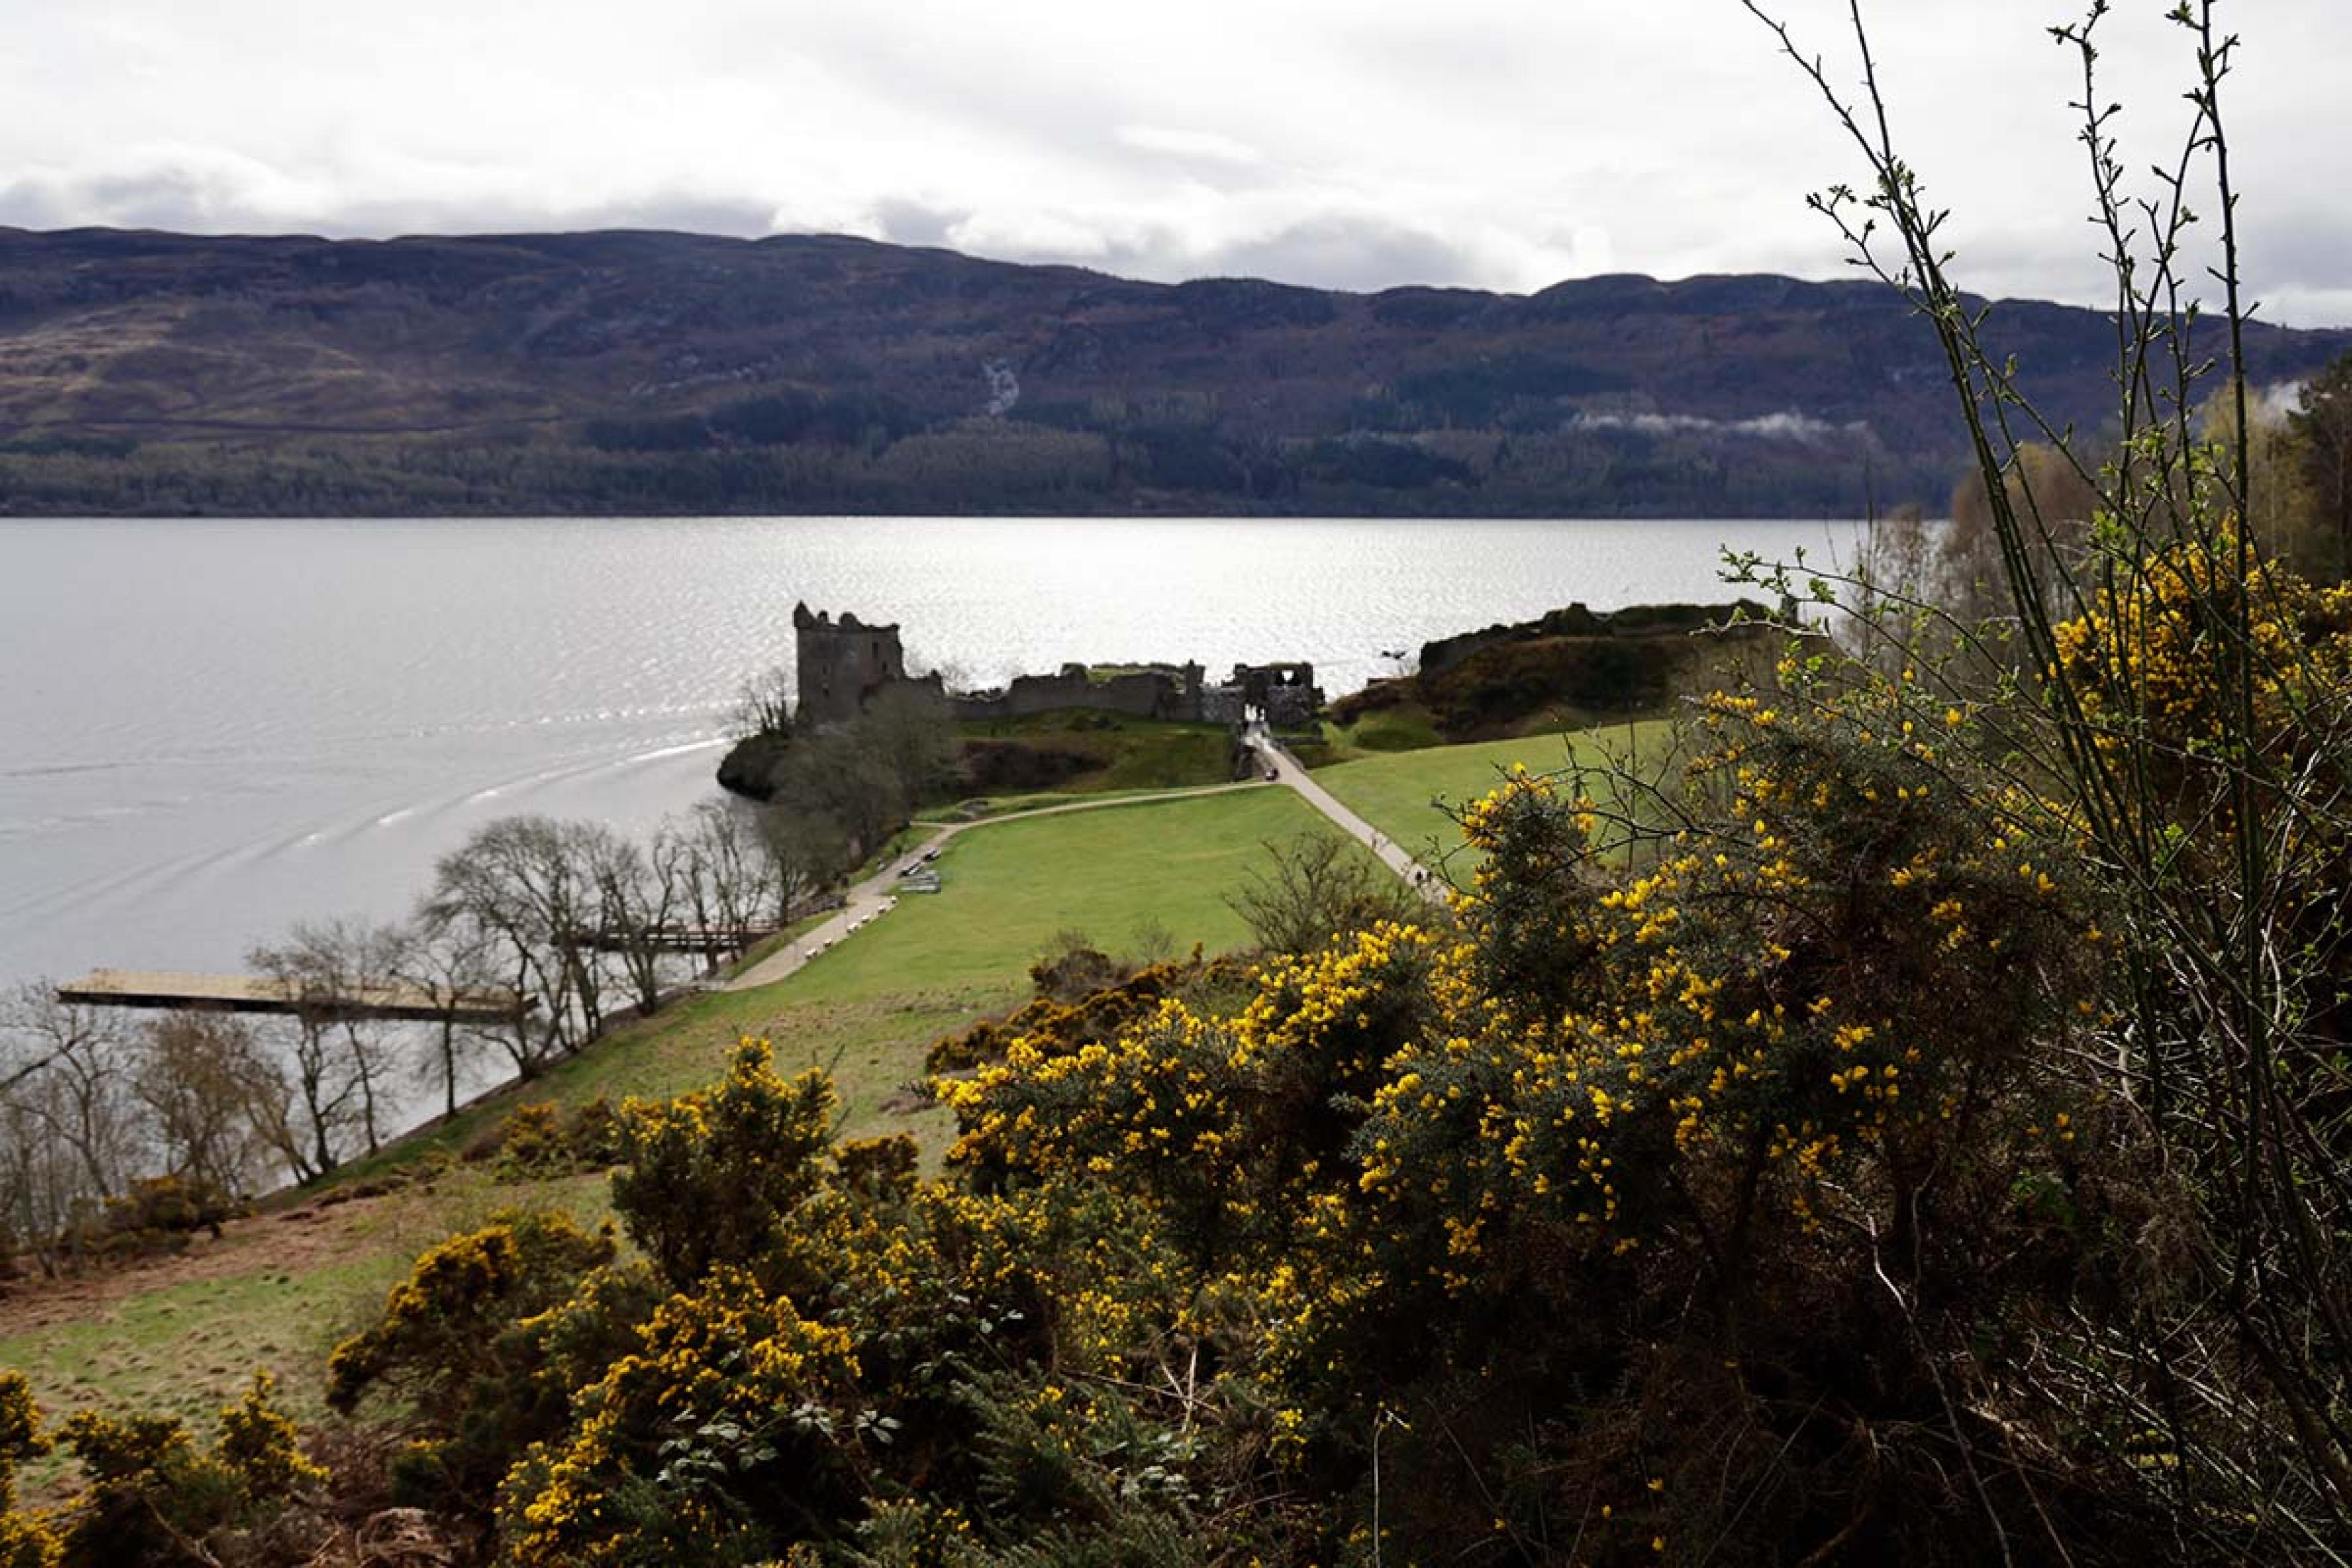 view of the loch ness from the hills above it